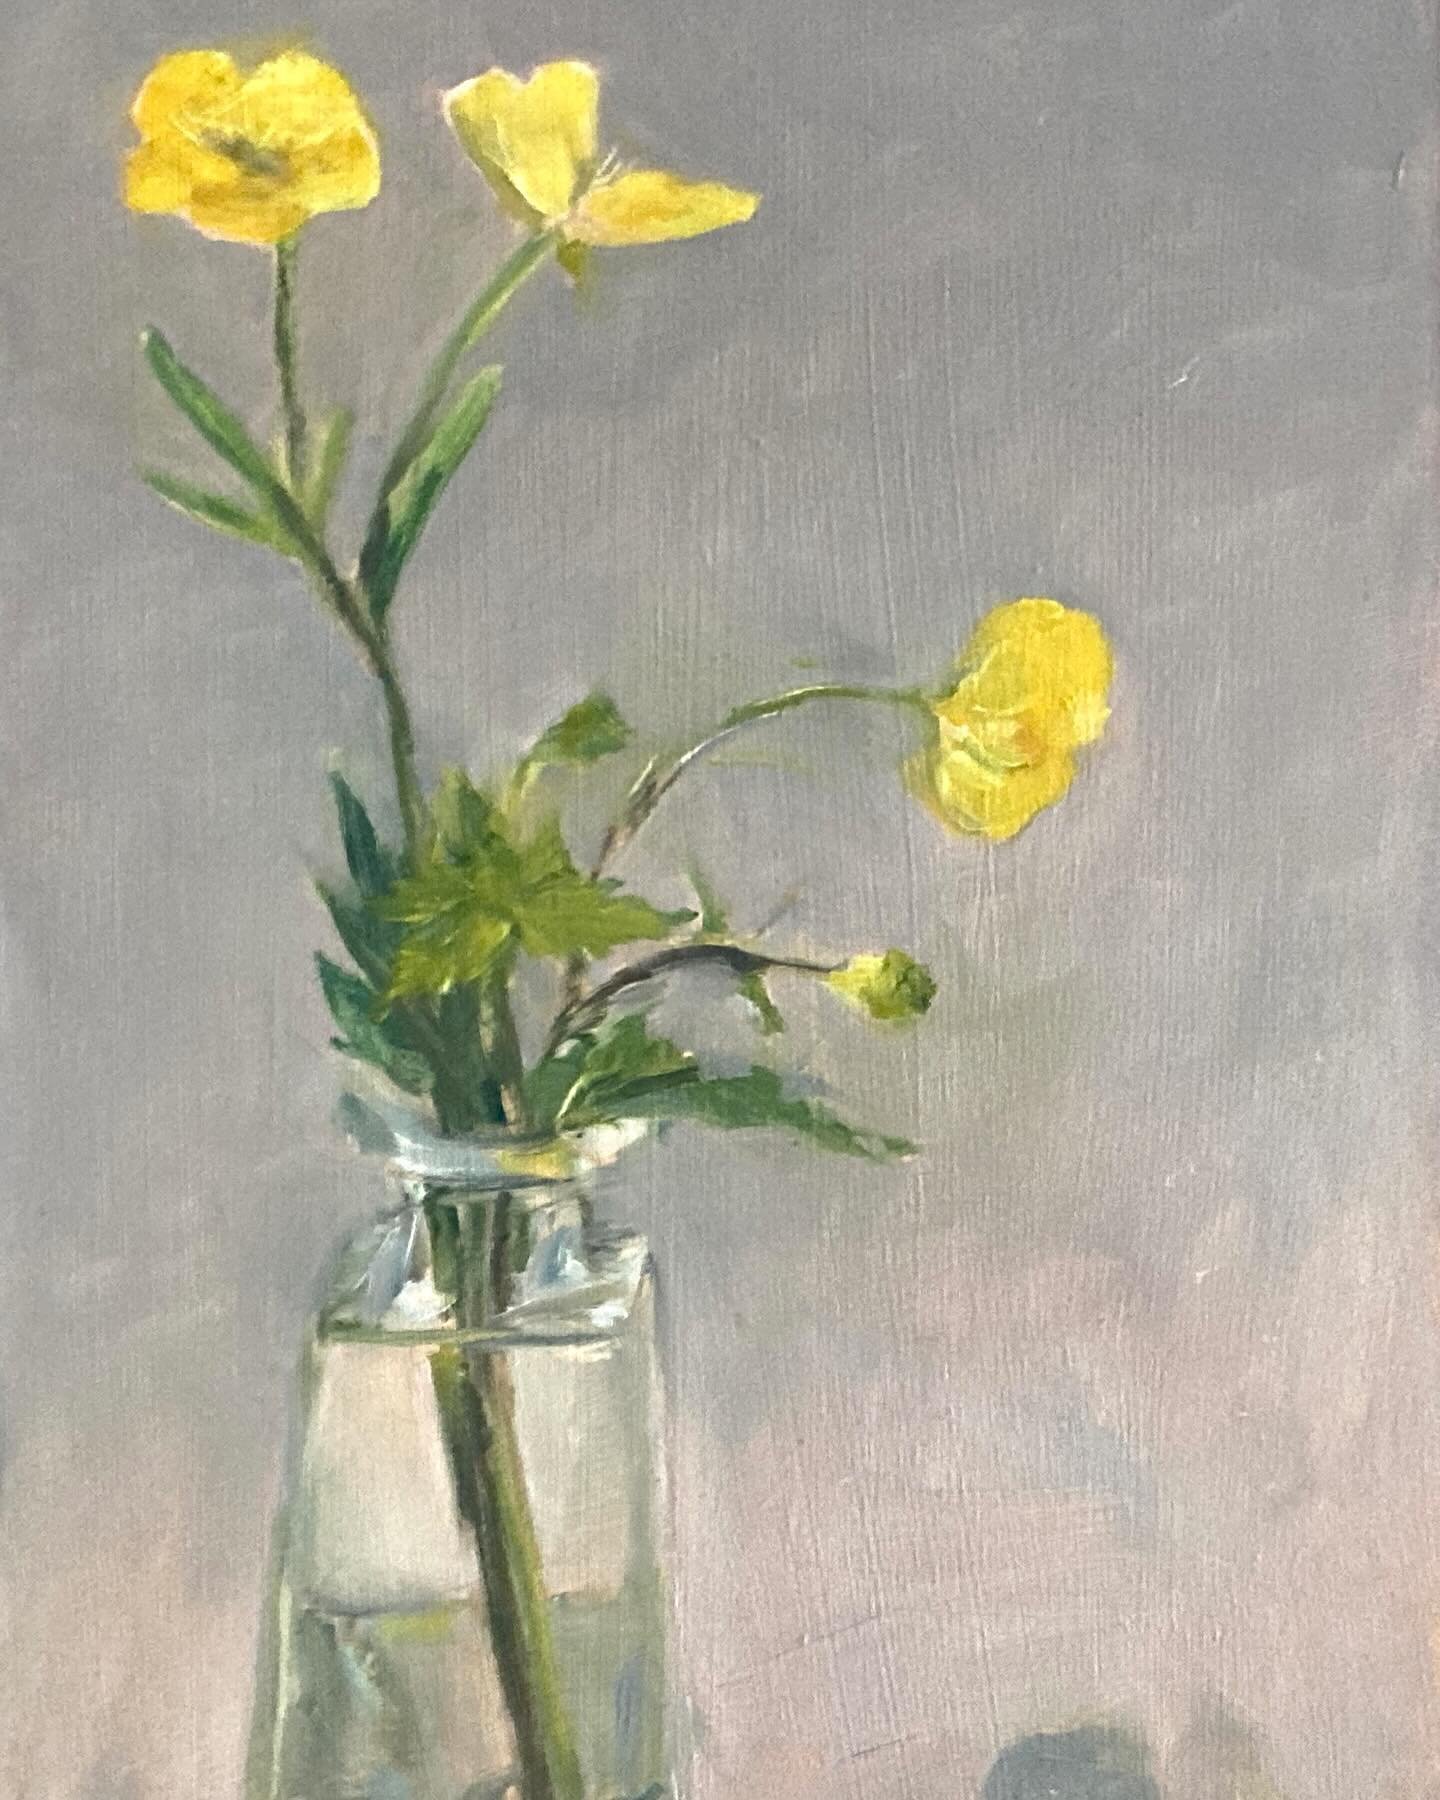 Wet day today so painted sunny buttercups with @jennyaitkenart 

First attempt at painting glass in oils so that was fun. It was the shape of the bottle that was the most tricky!

#stilllife #stilllifepainting #guernseyartist #guernseylife
#guernseya